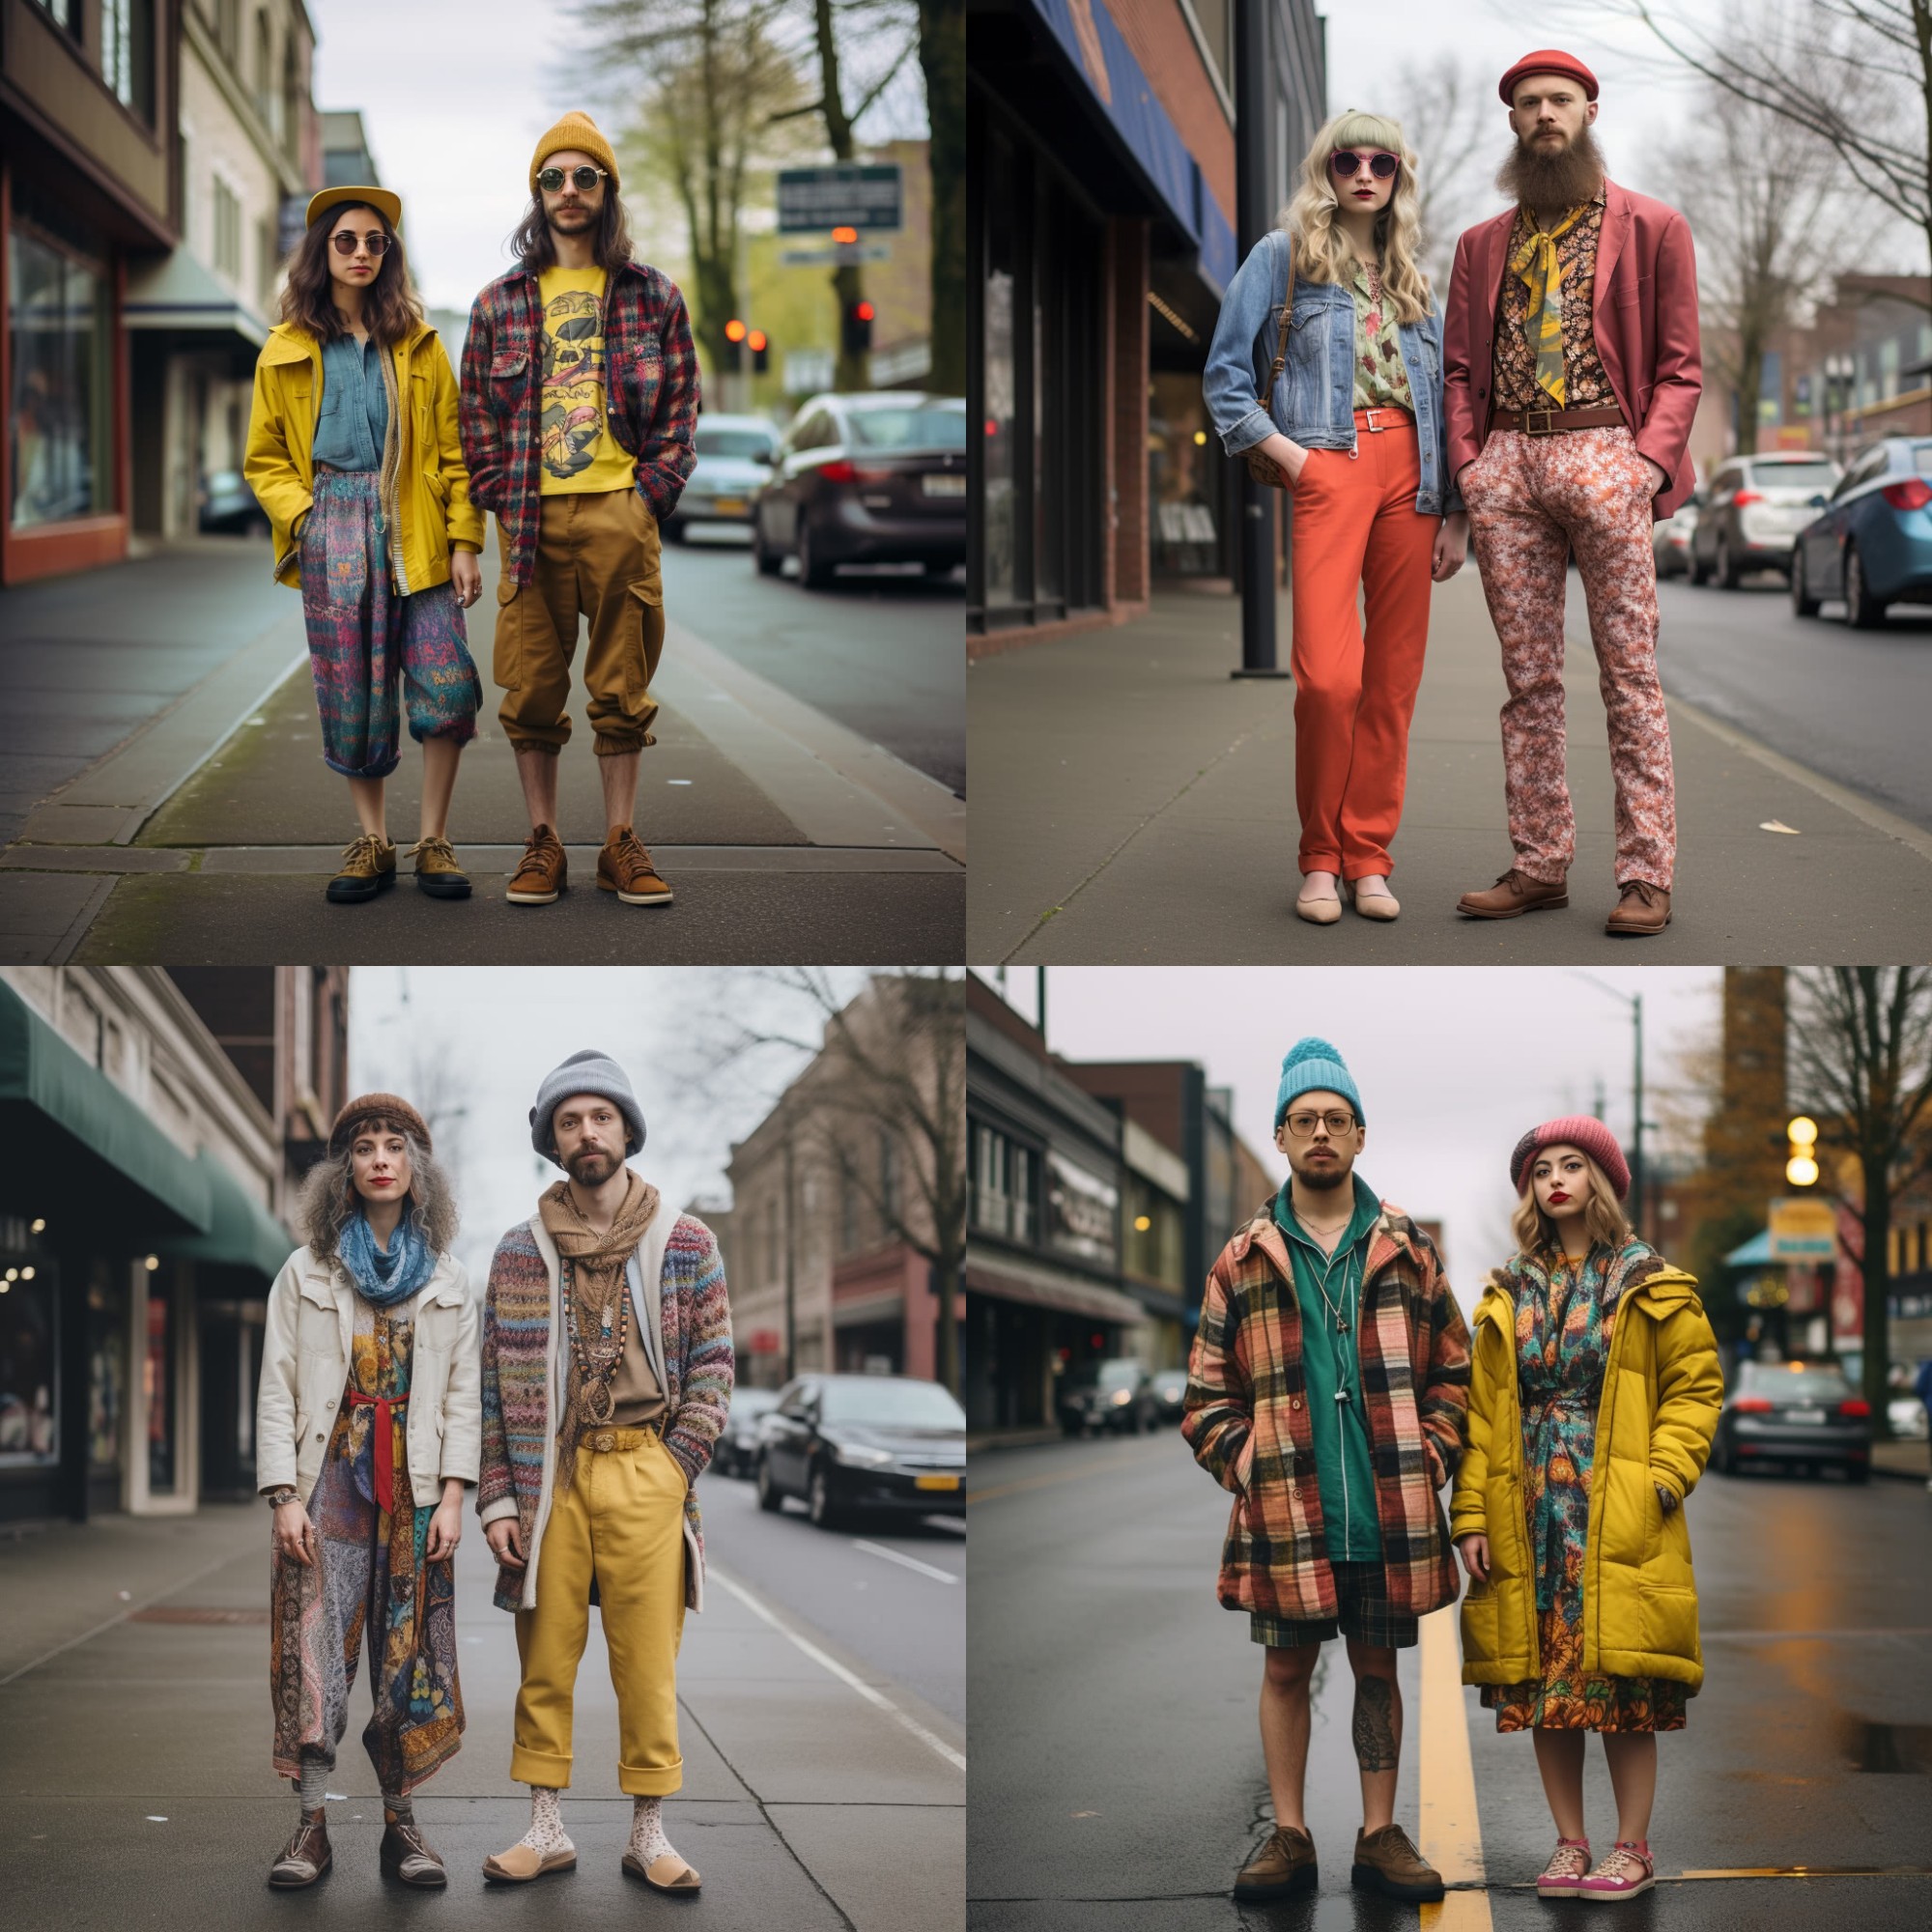 AI curated images of the average fashion style of individuals in Oregon